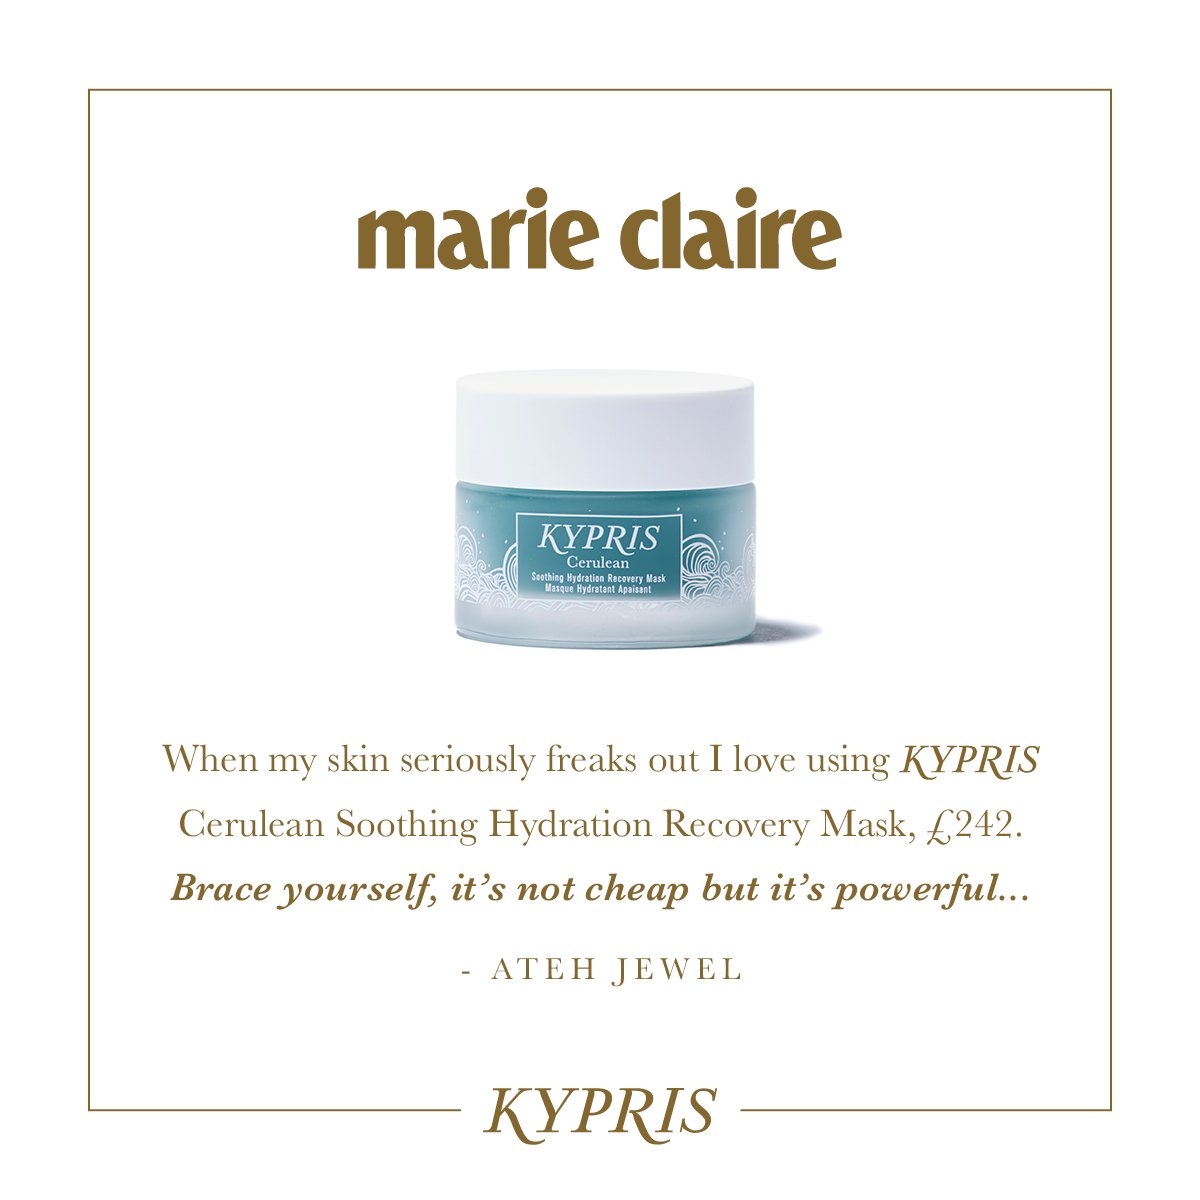 KYPRIS In The Press: Marie Claire